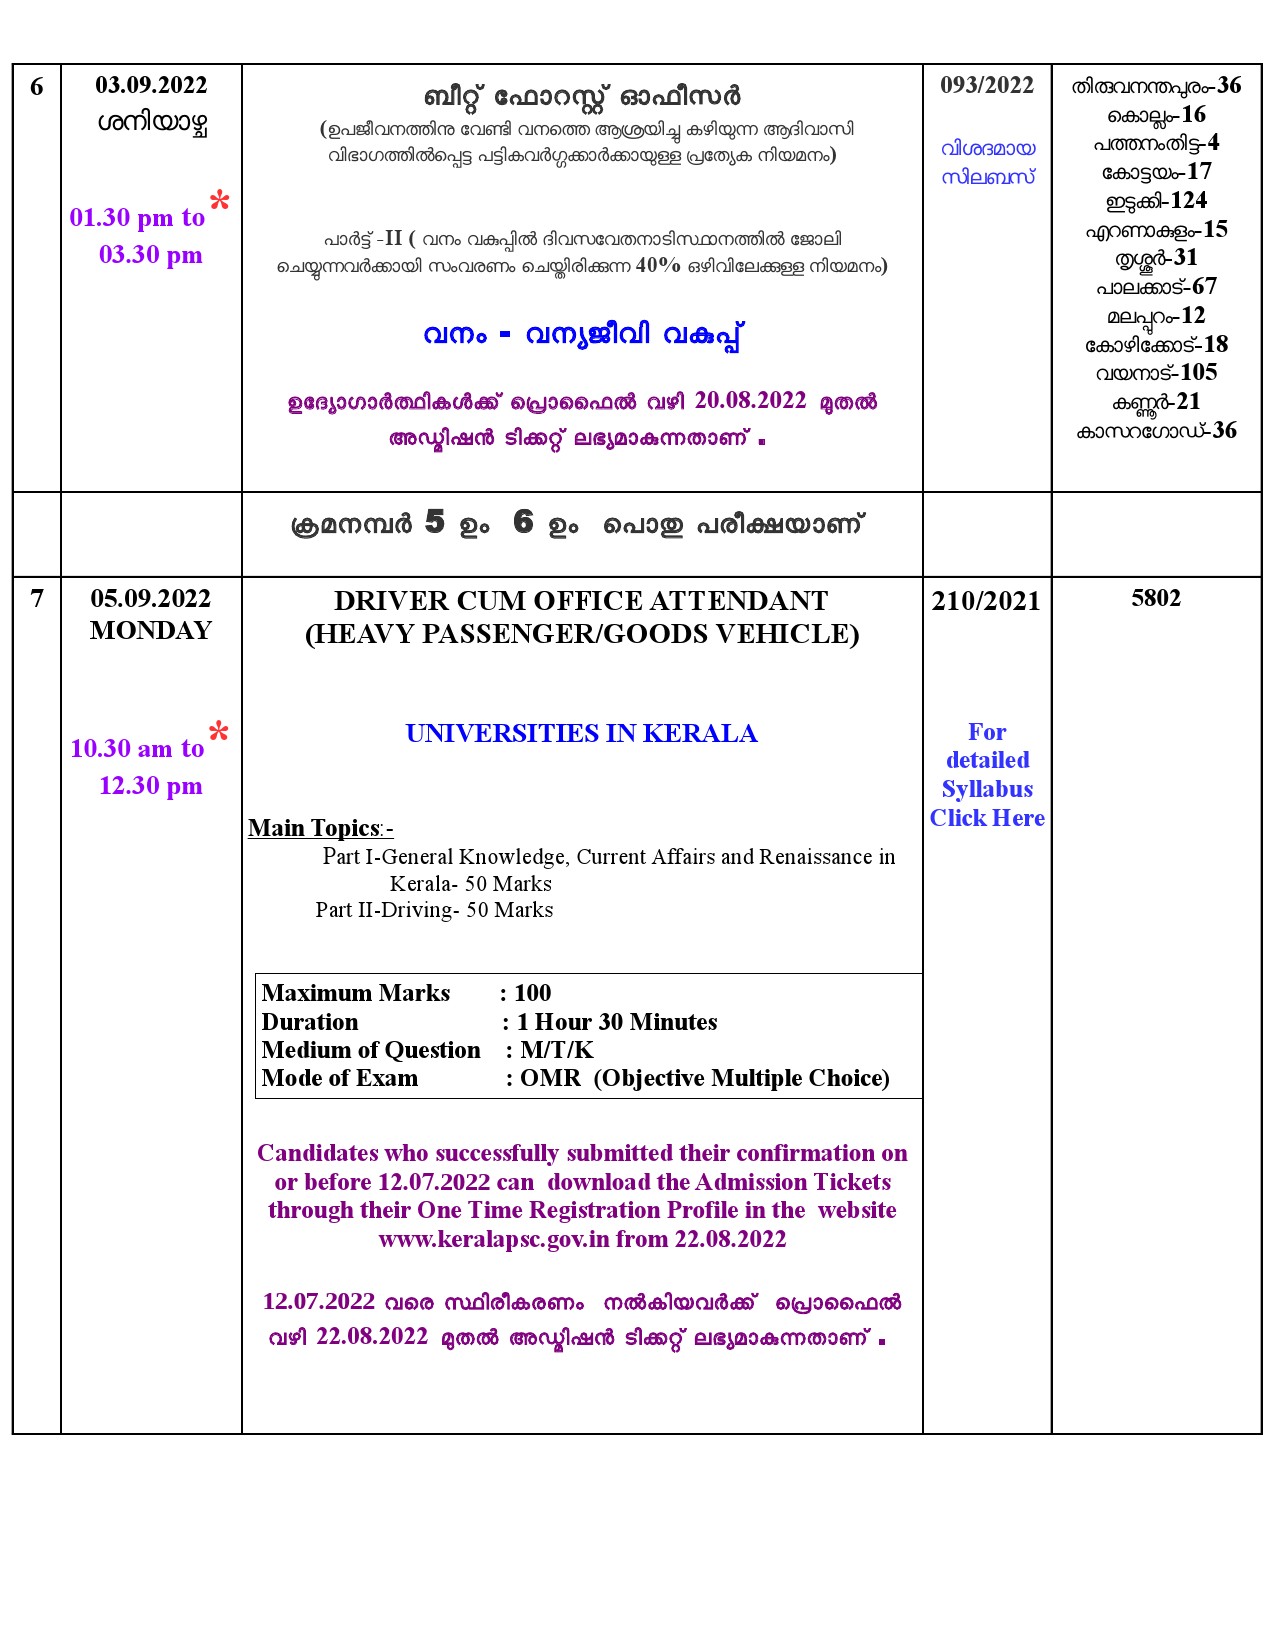 KPSC Modified Exam For The Month Of September 2022 - Notification Image 4